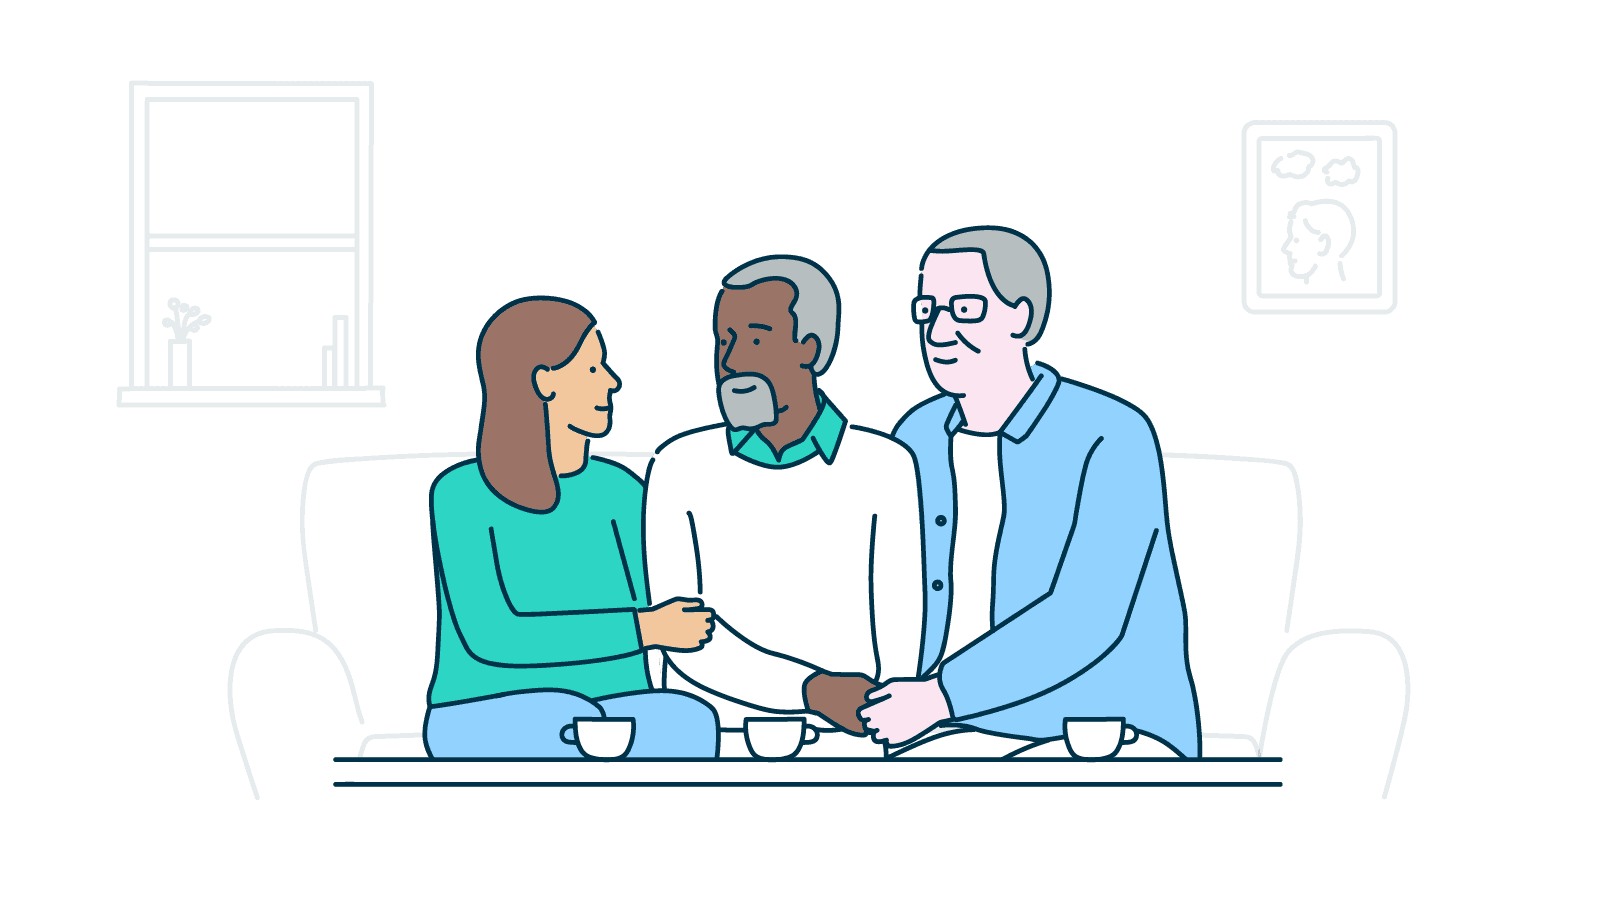 An illustration of three people, with two providing support to the one in the middle